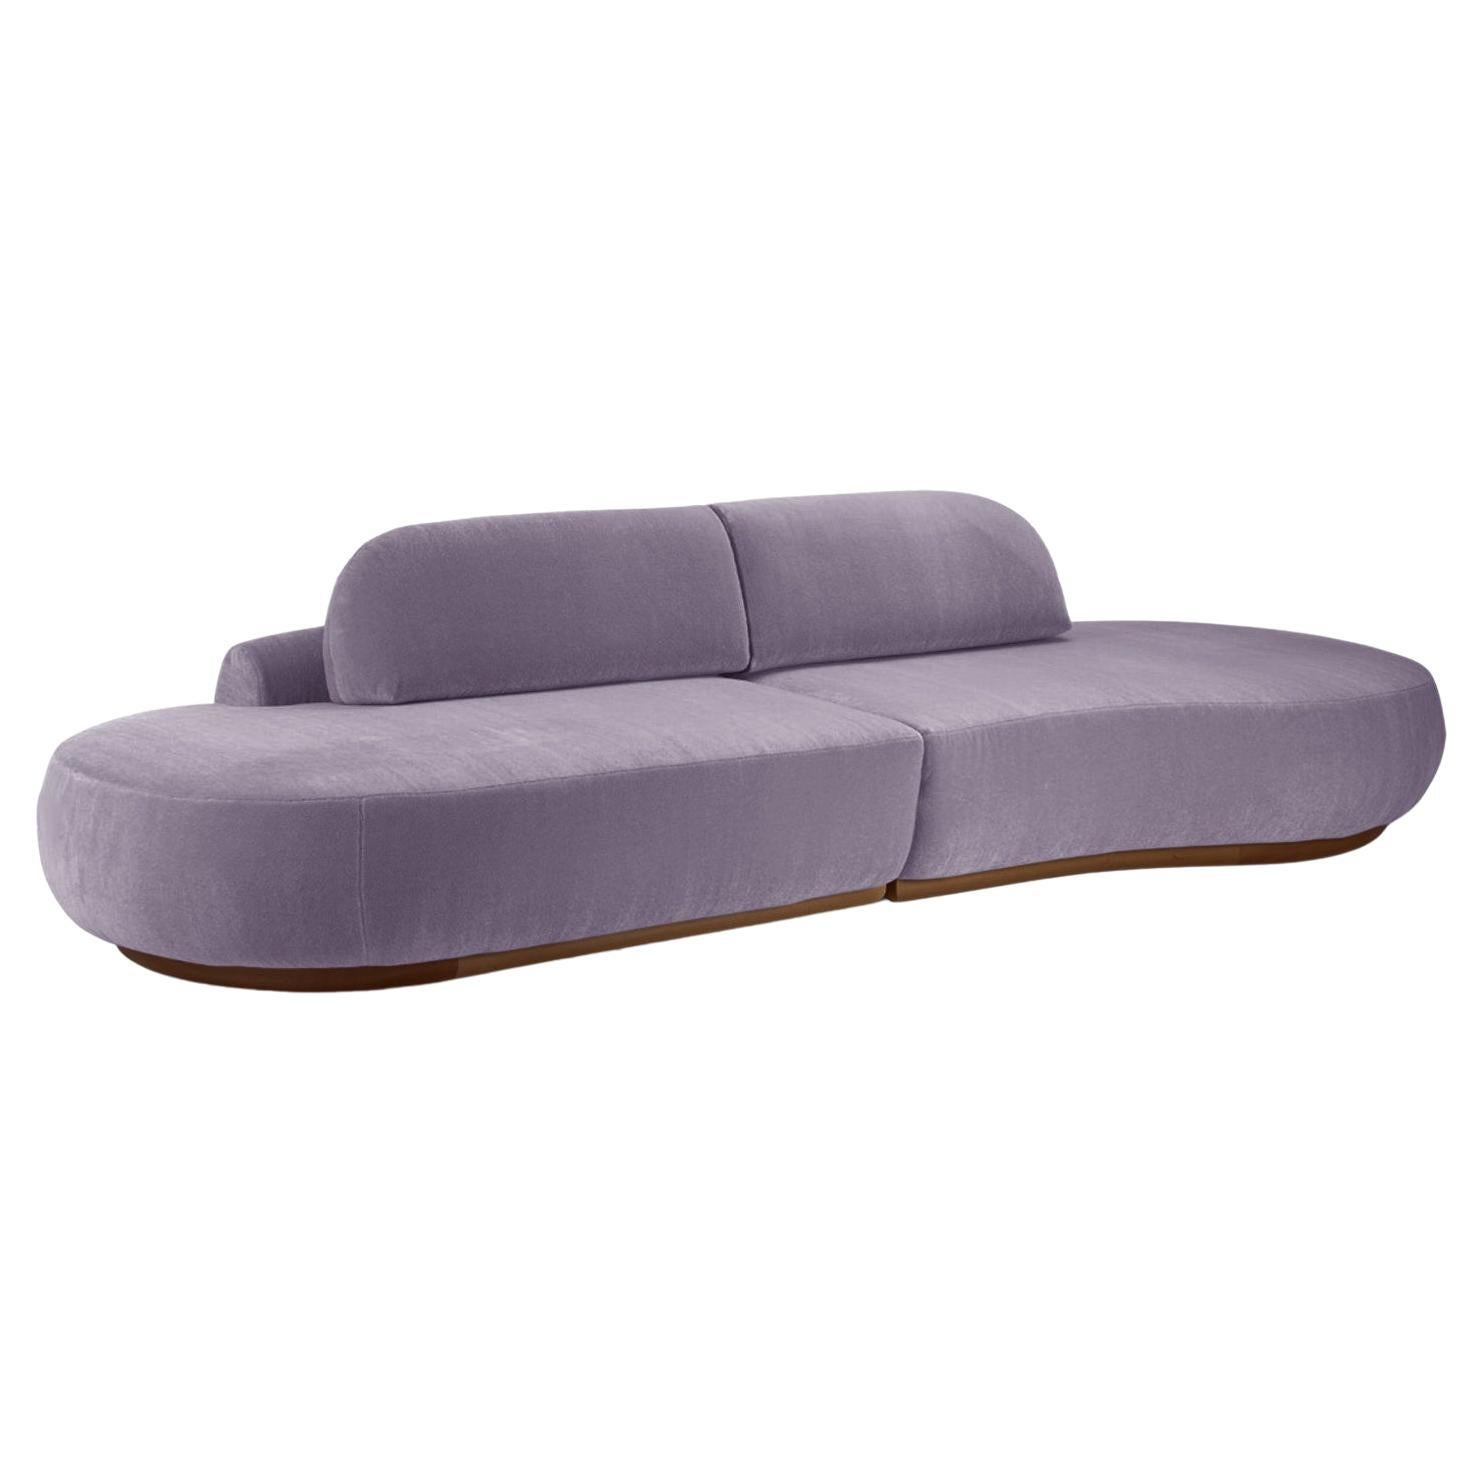 Naked Curved Sectional Sofa, 2 Piece with Beech Ash-056-1 and Paris Lavanda For Sale